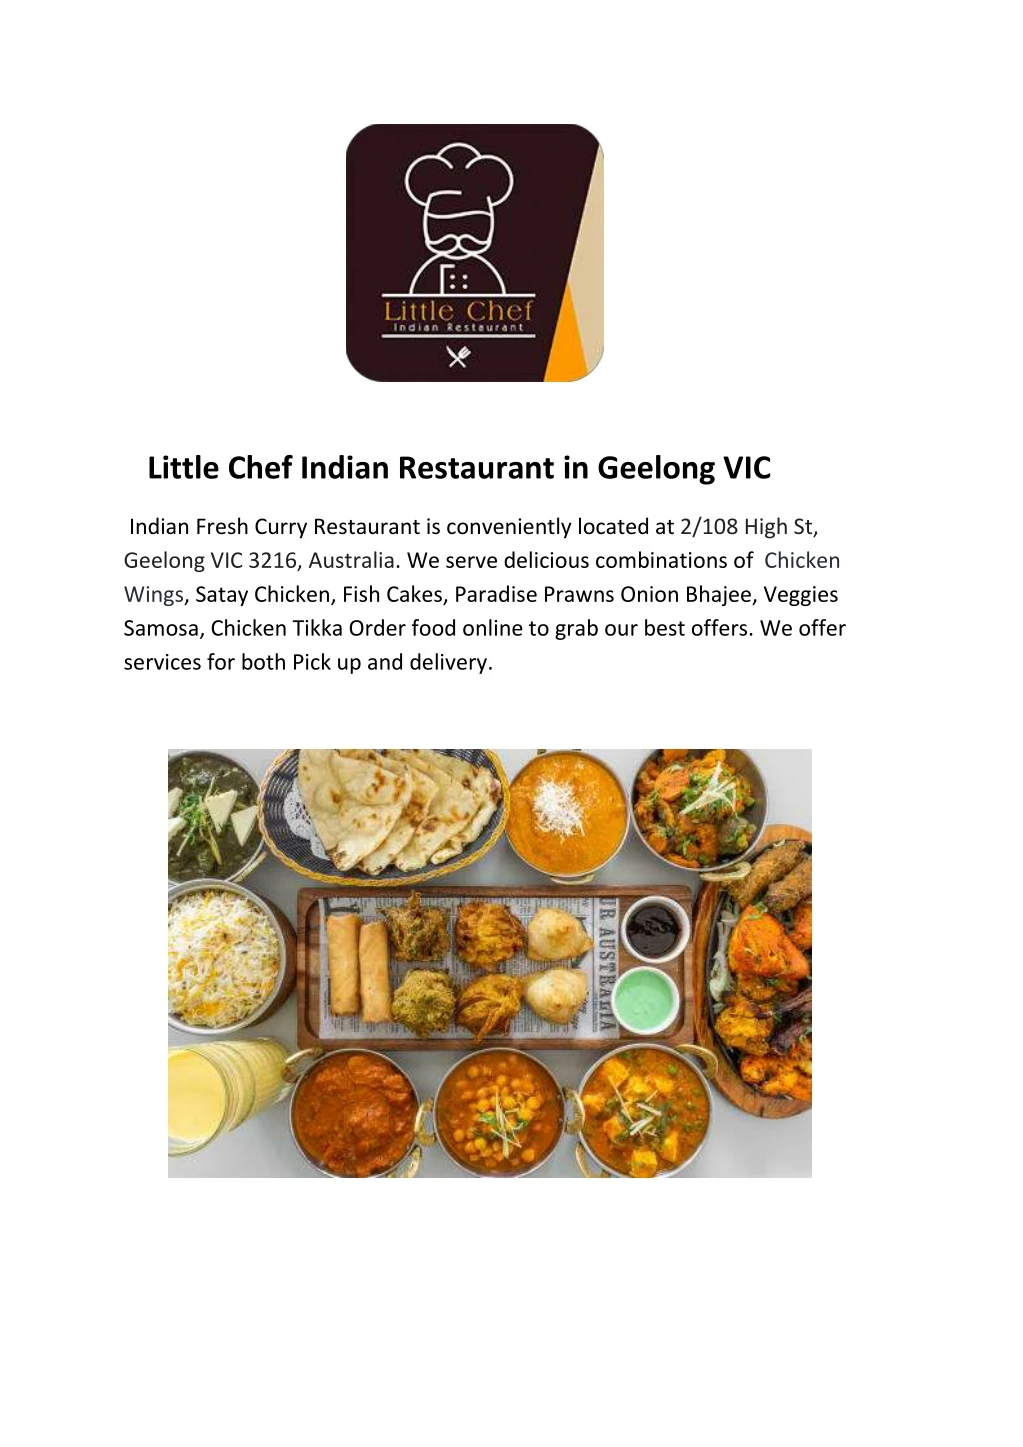 little chef indian restaurant in geelong vic